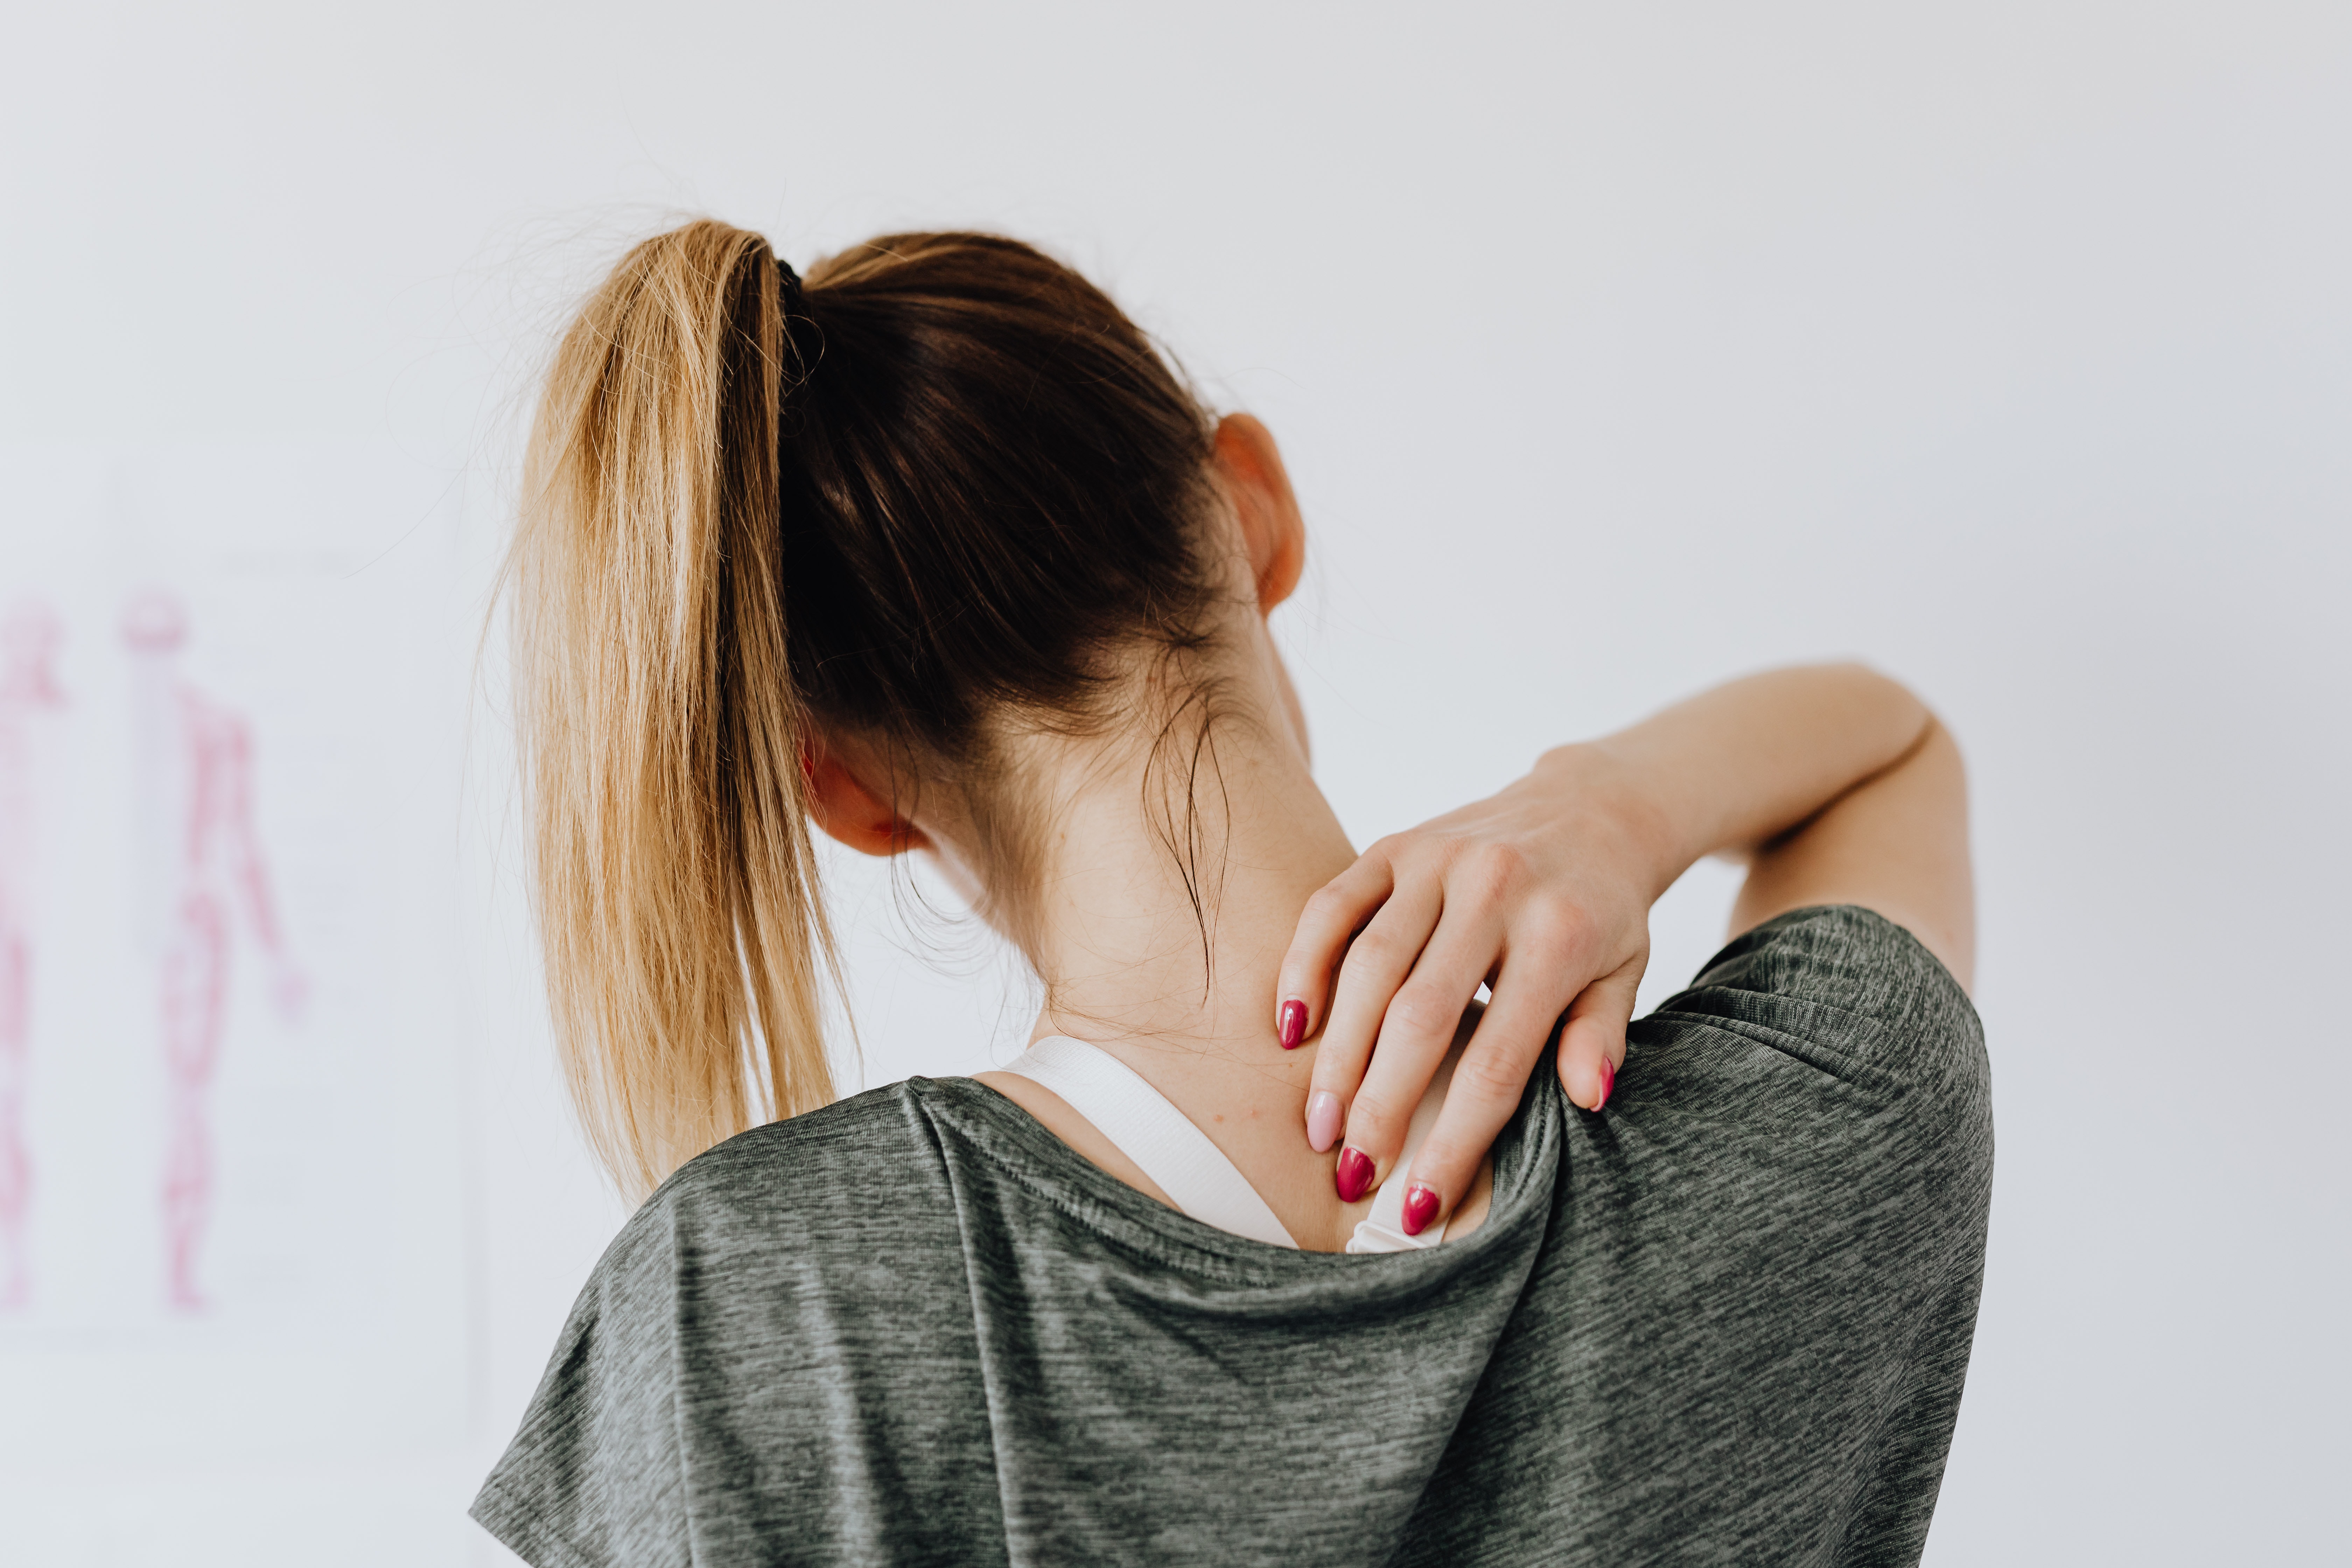 A teen girl's head and shoulders, viewed from the back as she indicates neck or back pain. The girl has dyed blonde hair and red painted fingernails.